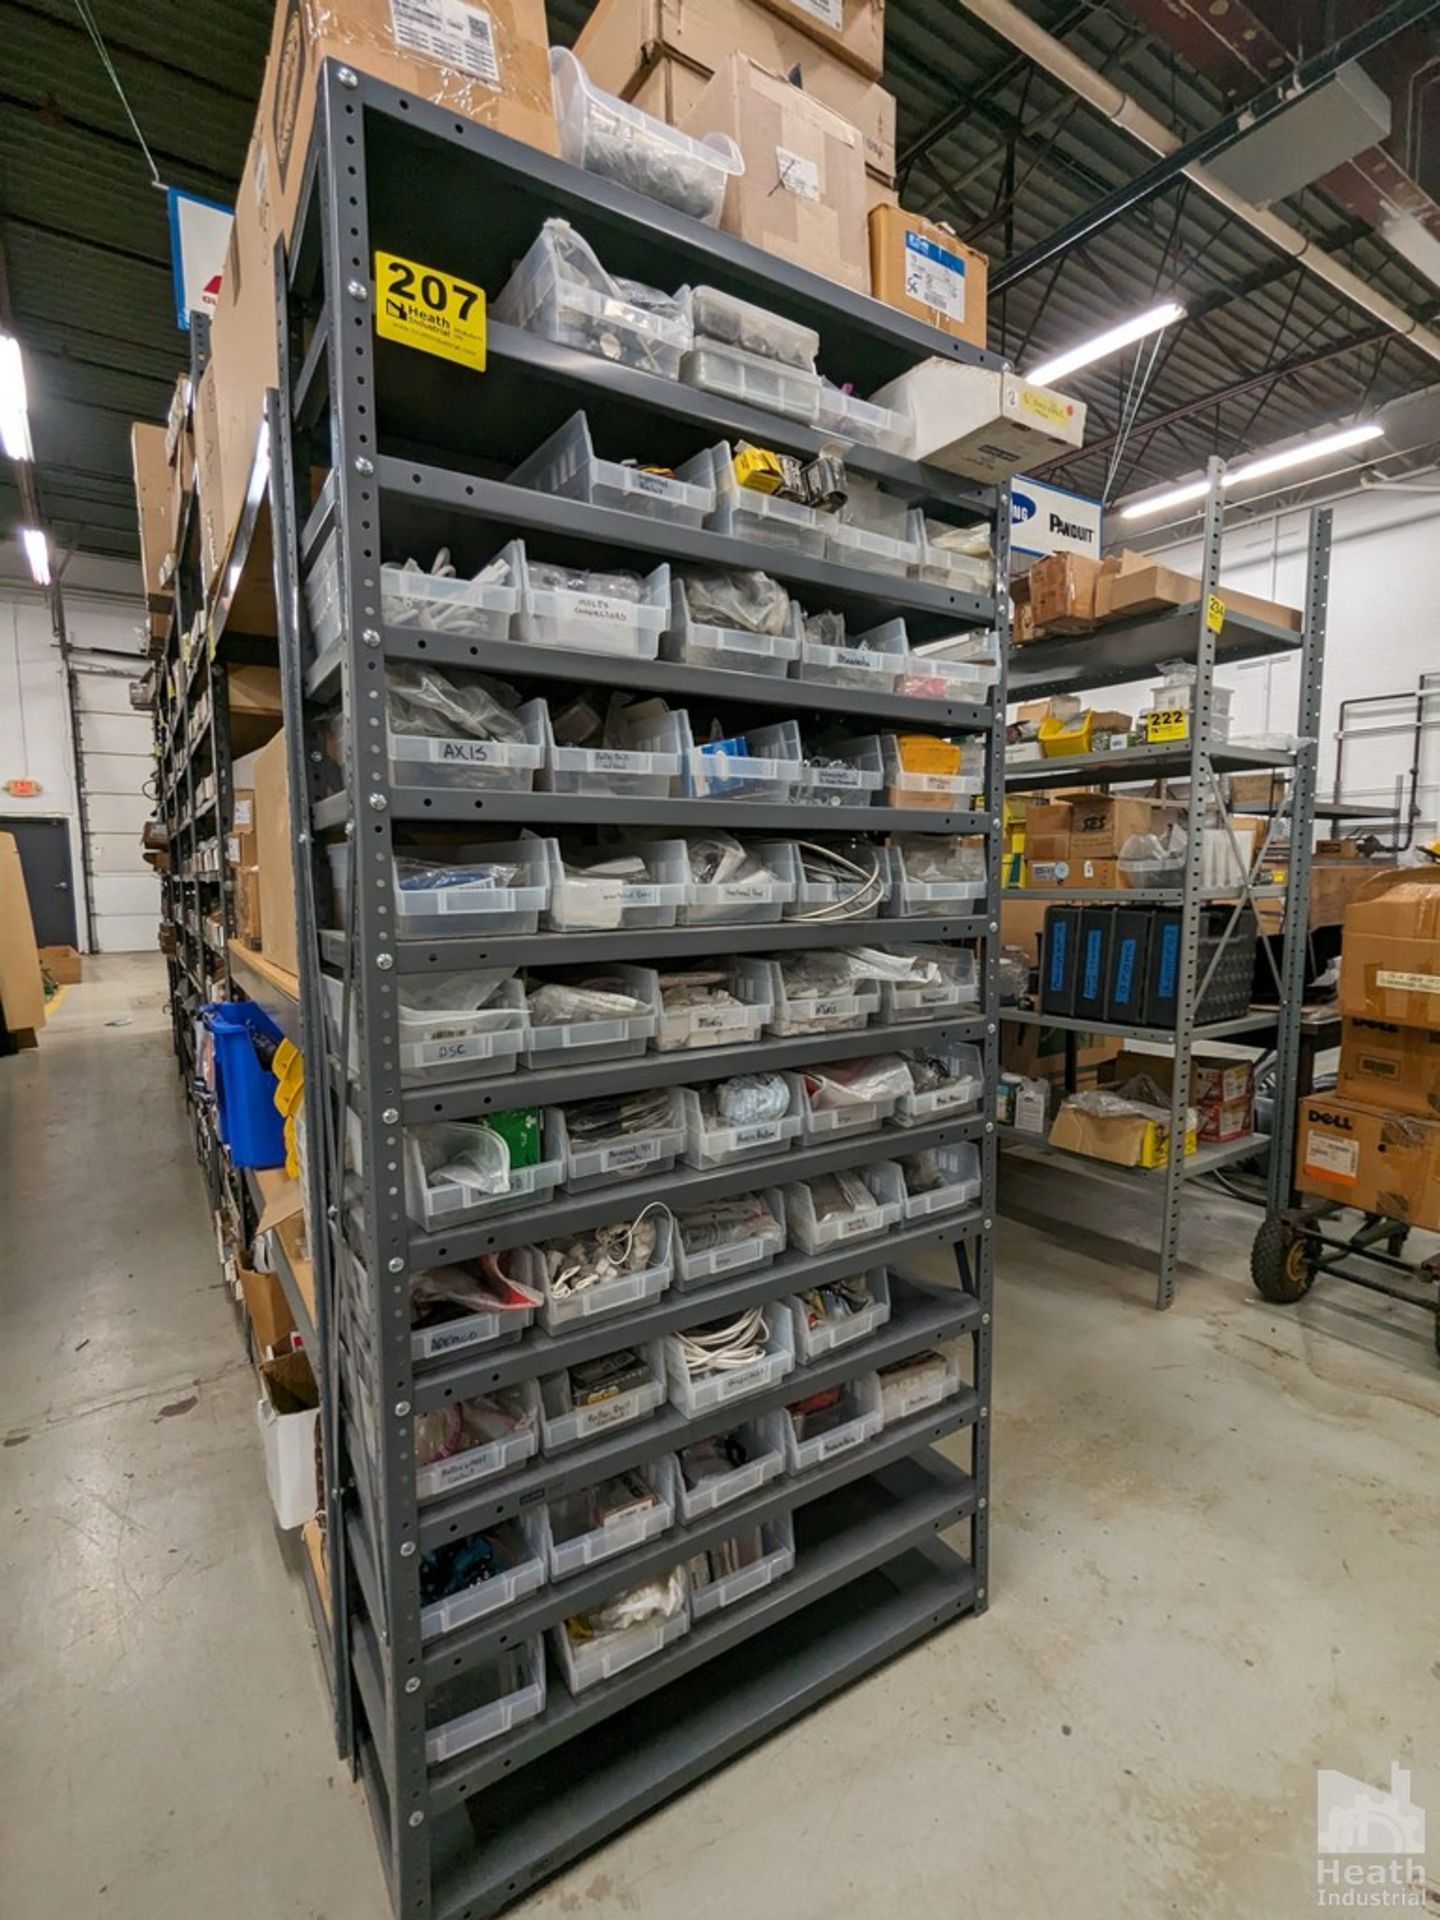 SHELF UNIT WITH MOLEX CONNECTORS, ROLLER BALL SWITCHES, MAGNETIC SWITCHES, ETC.